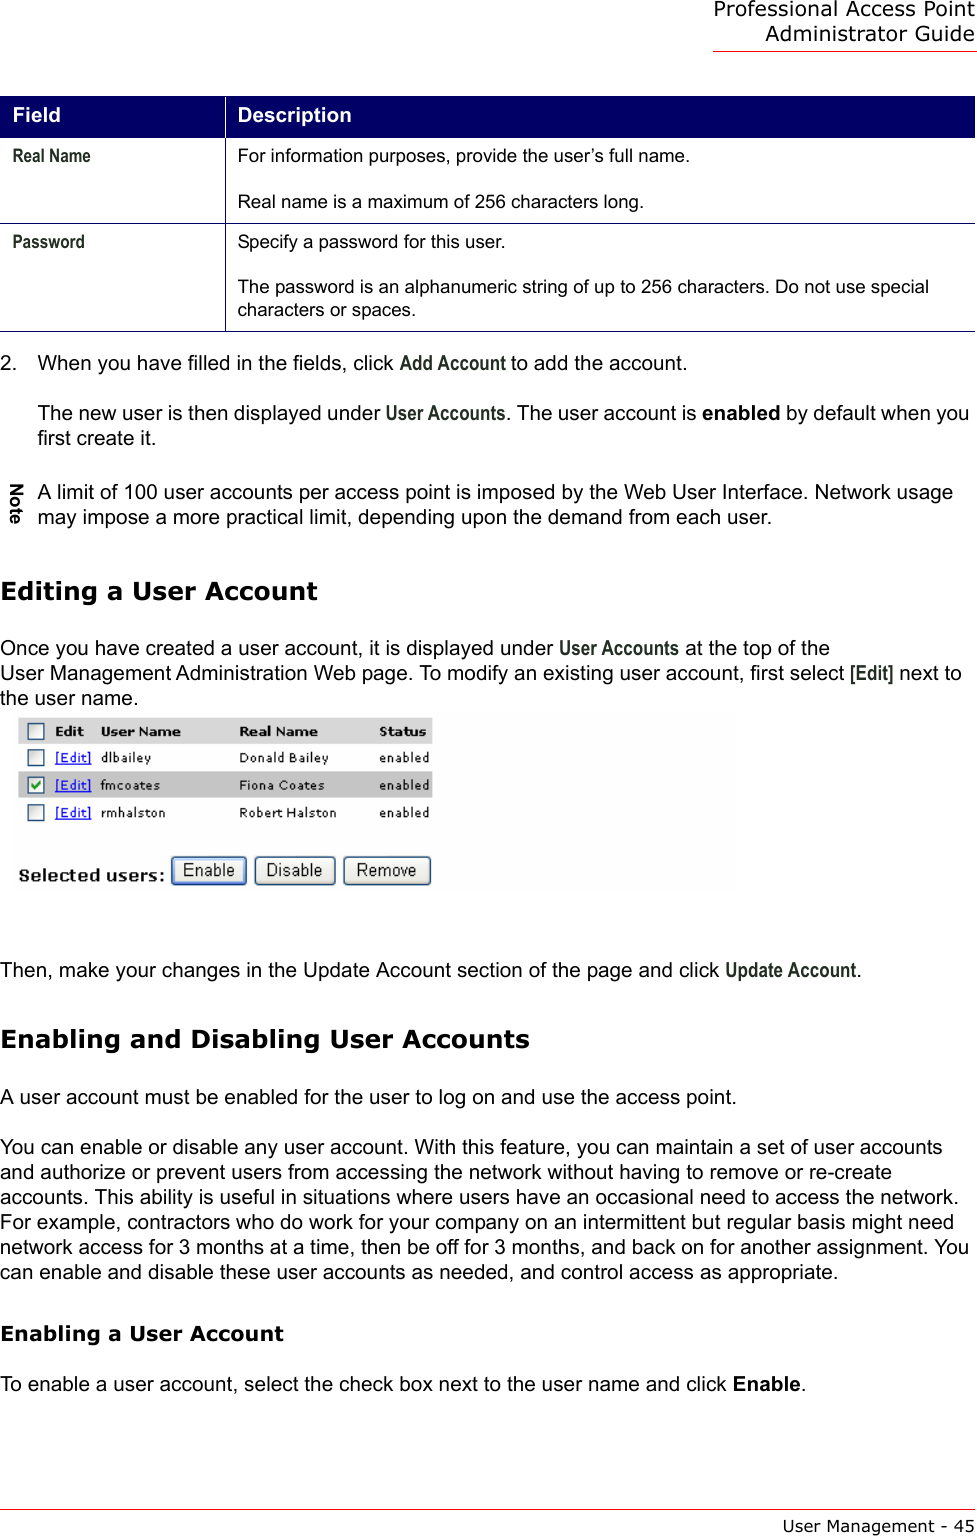 Professional Access Point Administrator GuideUser Management - 452. When you have filled in the fields, click Add Account to add the account.The new user is then displayed under User Accounts. The user account is enabled by default when you first create it.Editing a User AccountOnce you have created a user account, it is displayed under User Accounts at the top of the User Management Administration Web page. To modify an existing user account, first select [Edit] next to the user name.Then, make your changes in the Update Account section of the page and click Update Account.Enabling and Disabling User AccountsA user account must be enabled for the user to log on and use the access point.You can enable or disable any user account. With this feature, you can maintain a set of user accounts and authorize or prevent users from accessing the network without having to remove or re-create accounts. This ability is useful in situations where users have an occasional need to access the network. For example, contractors who do work for your company on an intermittent but regular basis might need network access for 3 months at a time, then be off for 3 months, and back on for another assignment. You can enable and disable these user accounts as needed, and control access as appropriate.Enabling a User AccountTo enable a user account, select the check box next to the user name and click Enable.Real Name For information purposes, provide the user’s full name.Real name is a maximum of 256 characters long.Password Specify a password for this user.The password is an alphanumeric string of up to 256 characters. Do not use special characters or spaces.NoteA limit of 100 user accounts per access point is imposed by the Web User Interface. Network usage may impose a more practical limit, depending upon the demand from each user. Field Description